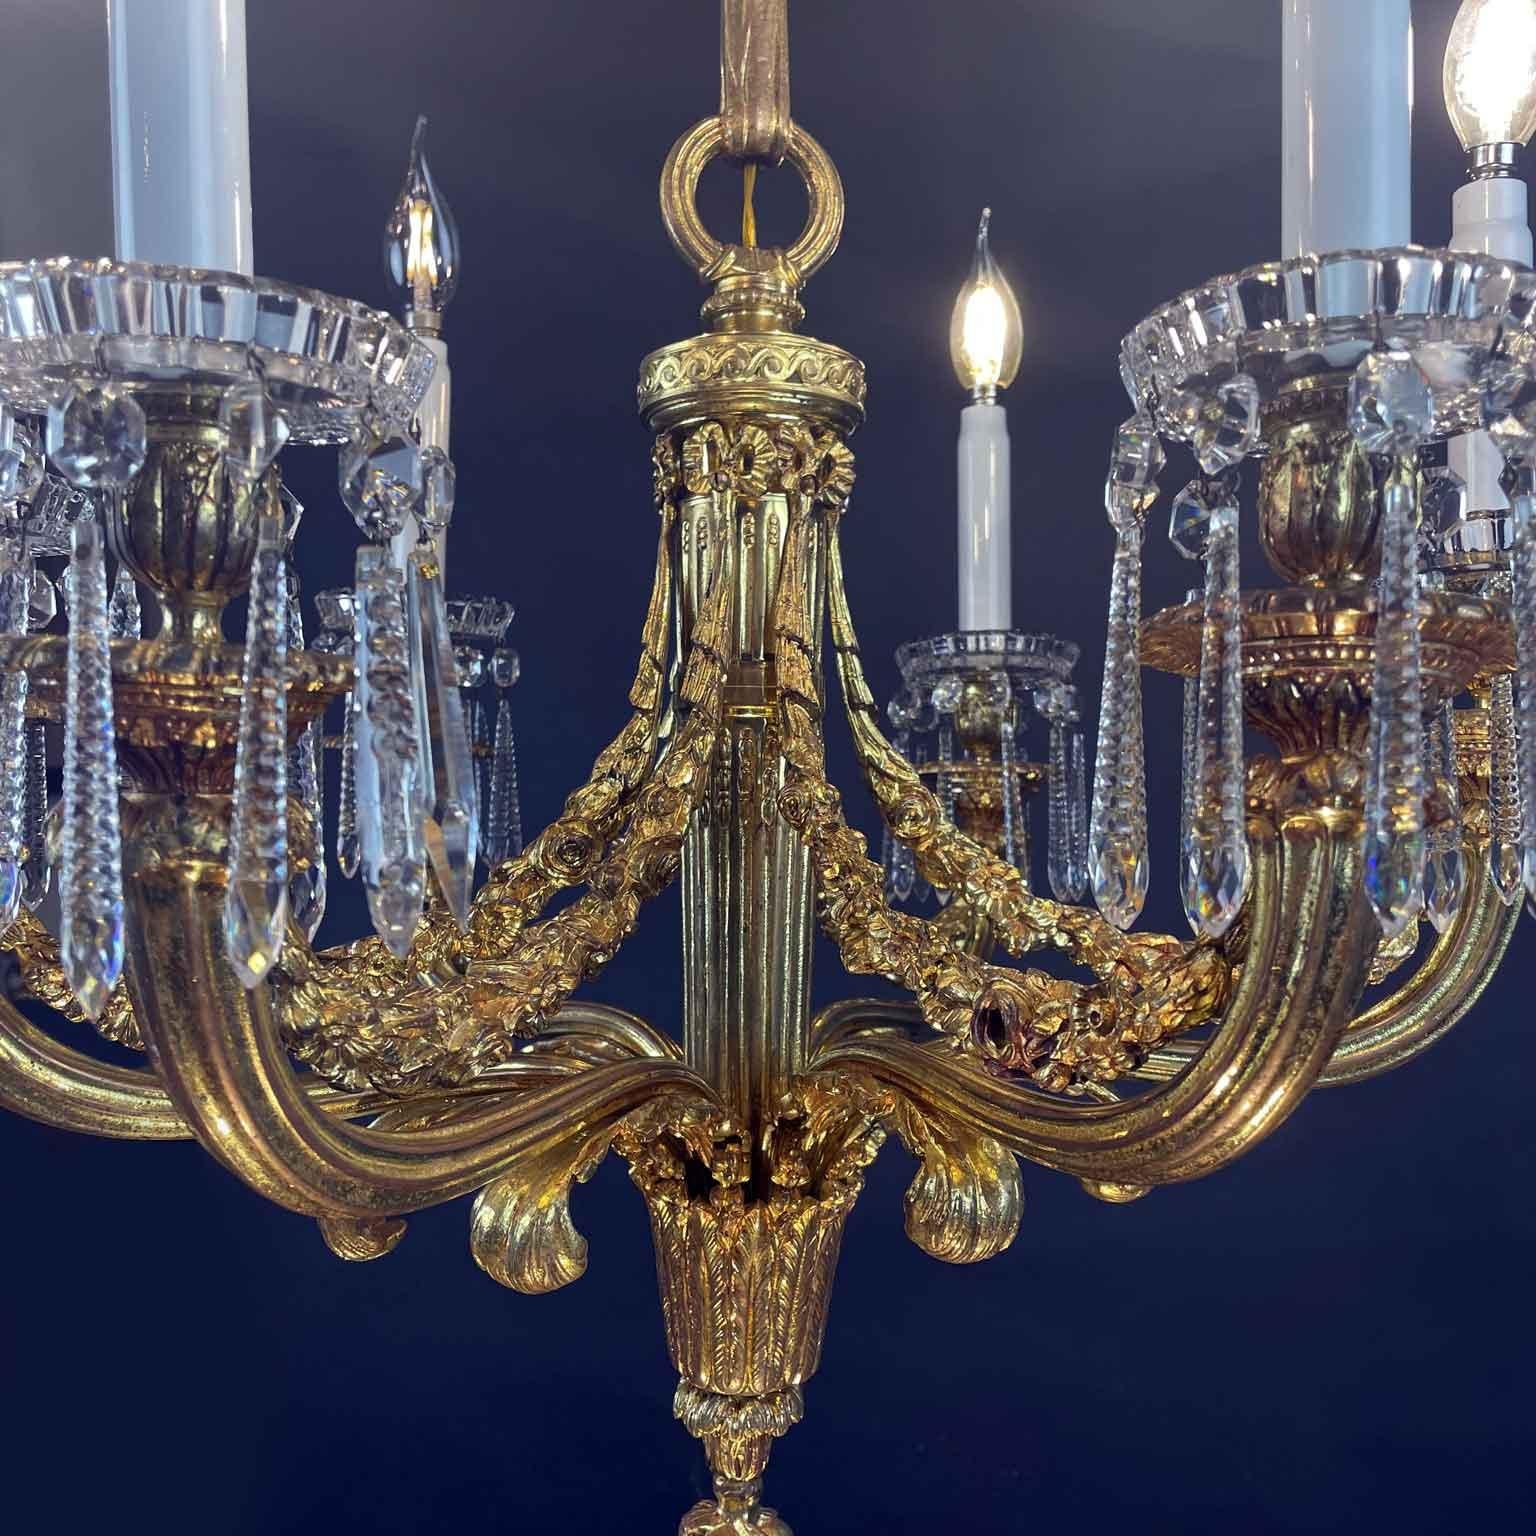 Baccarat Crystal and Ormolu Chandelier French 20th Century Empire Style Pendant 1